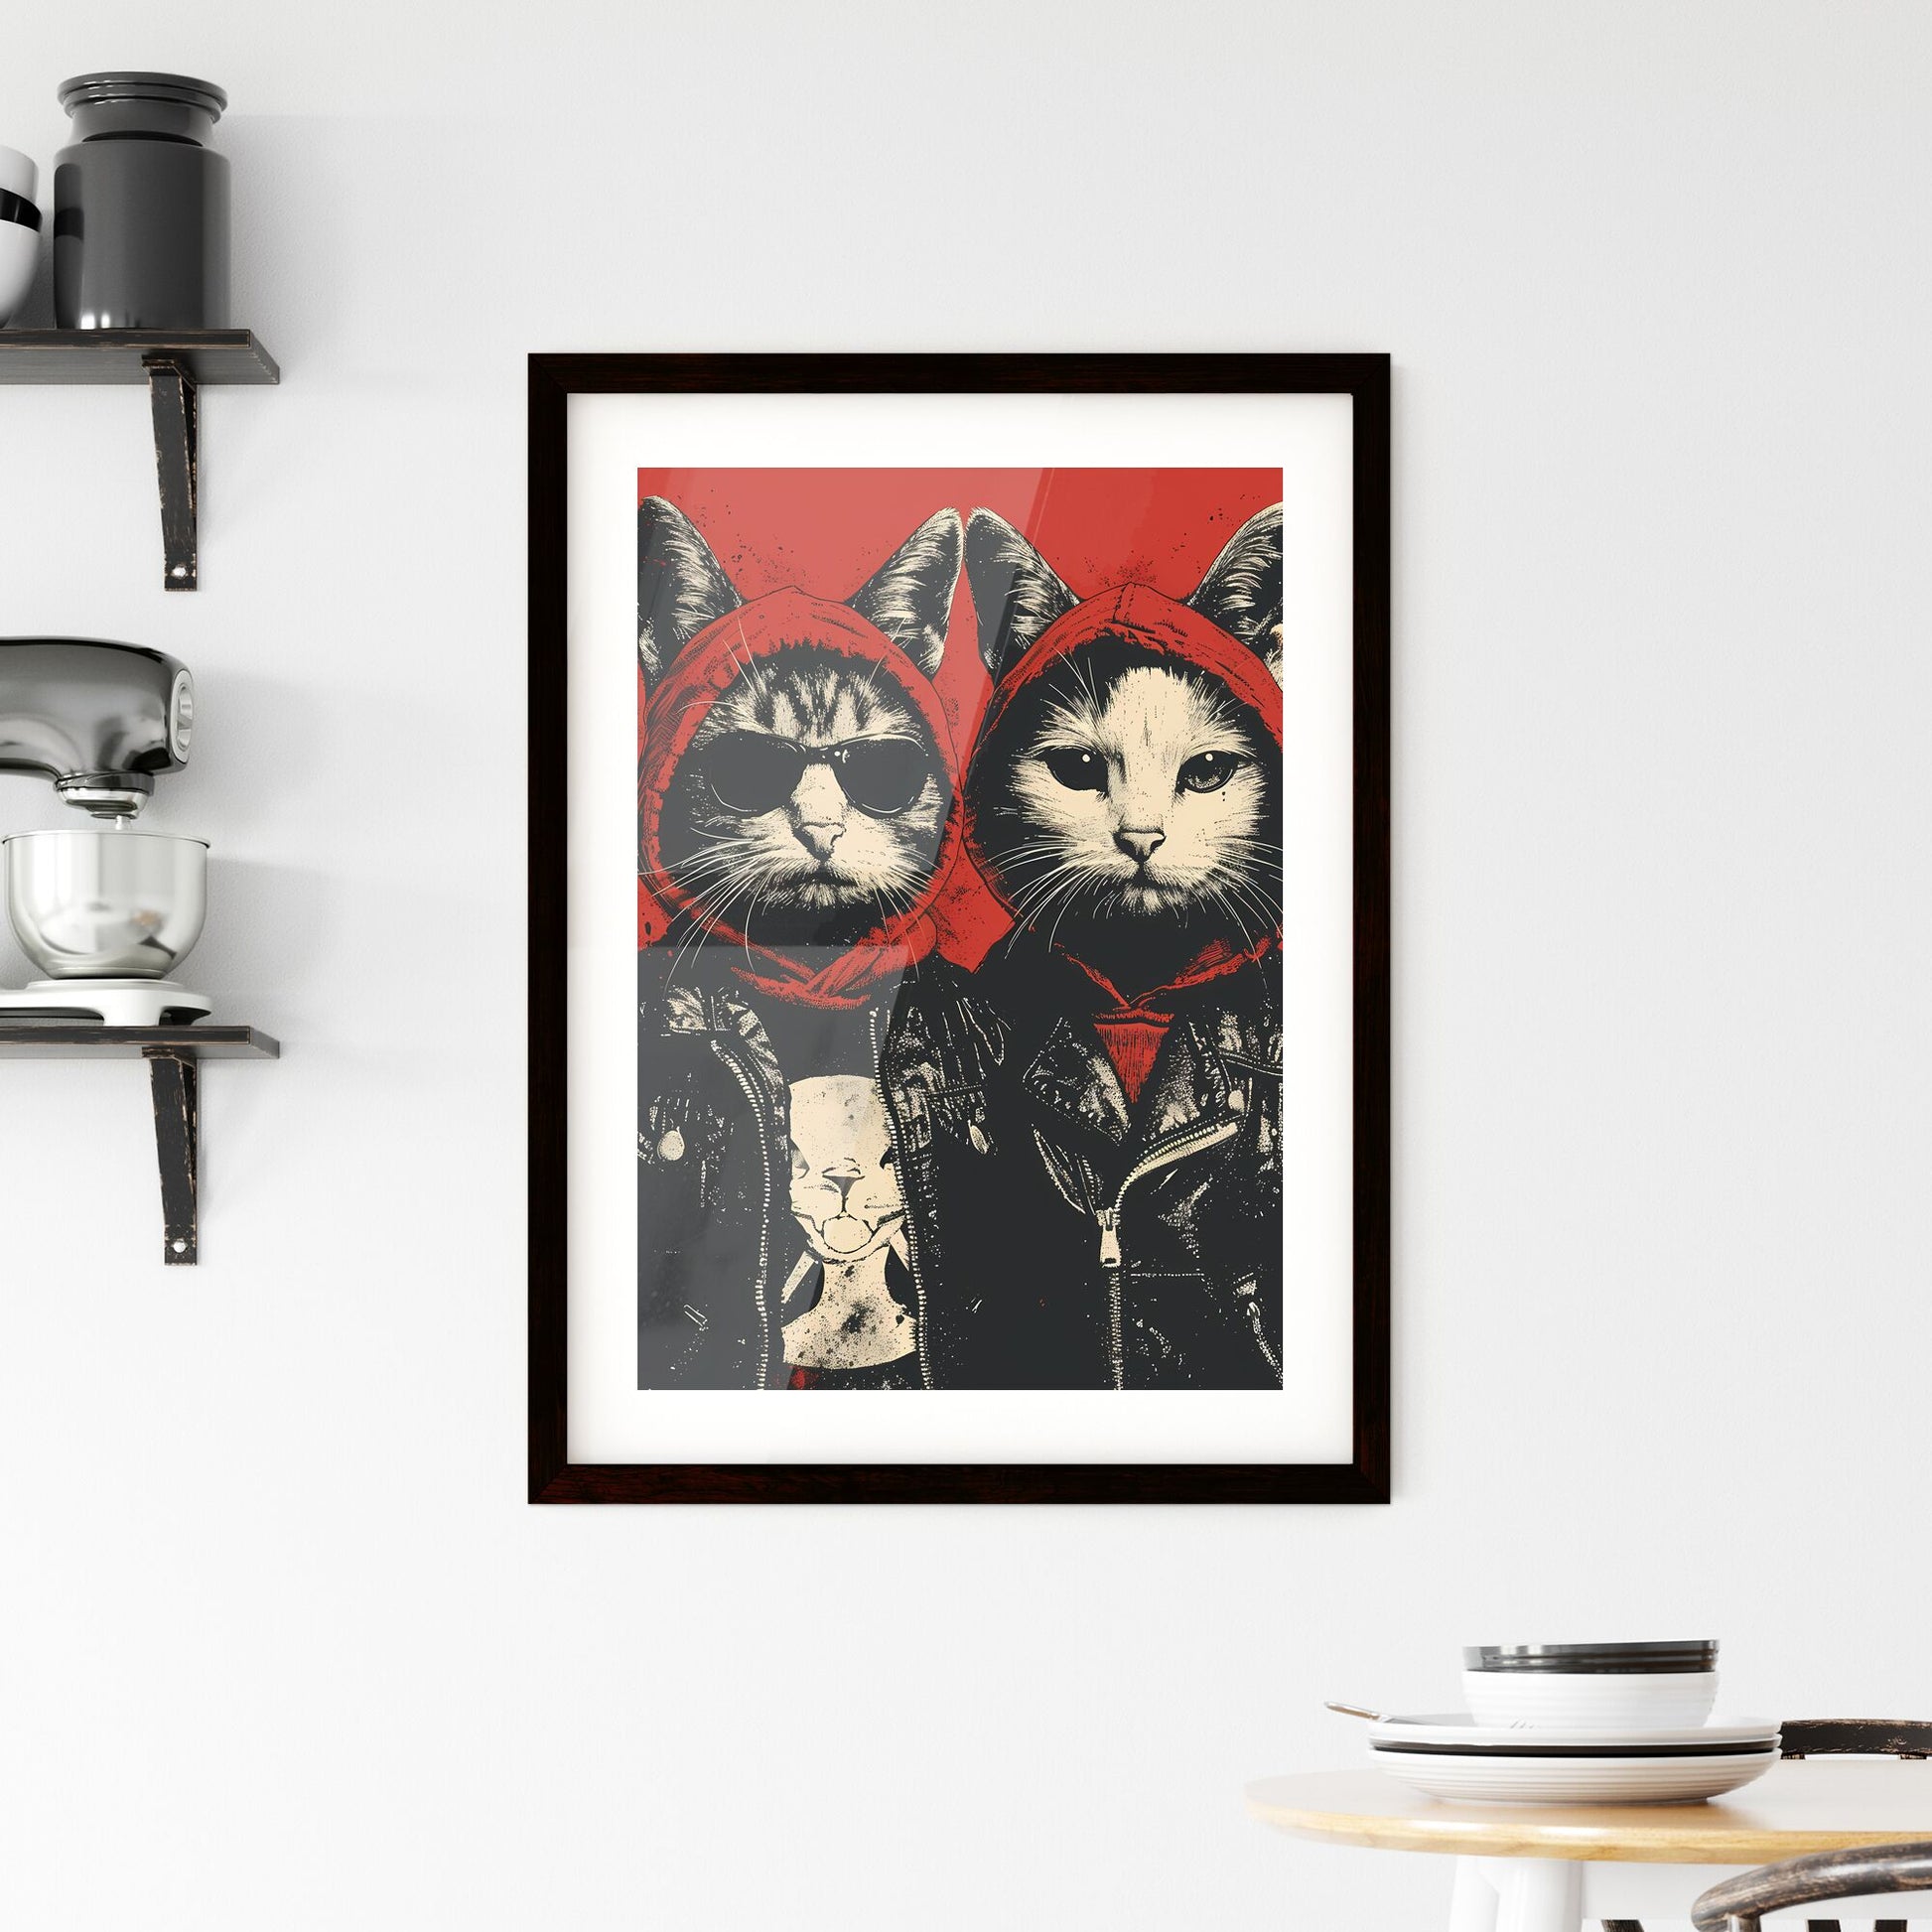 Kids wearing Halloween costumes - Art print of a couple of cats wearing hoodies and sunglasses Default Title